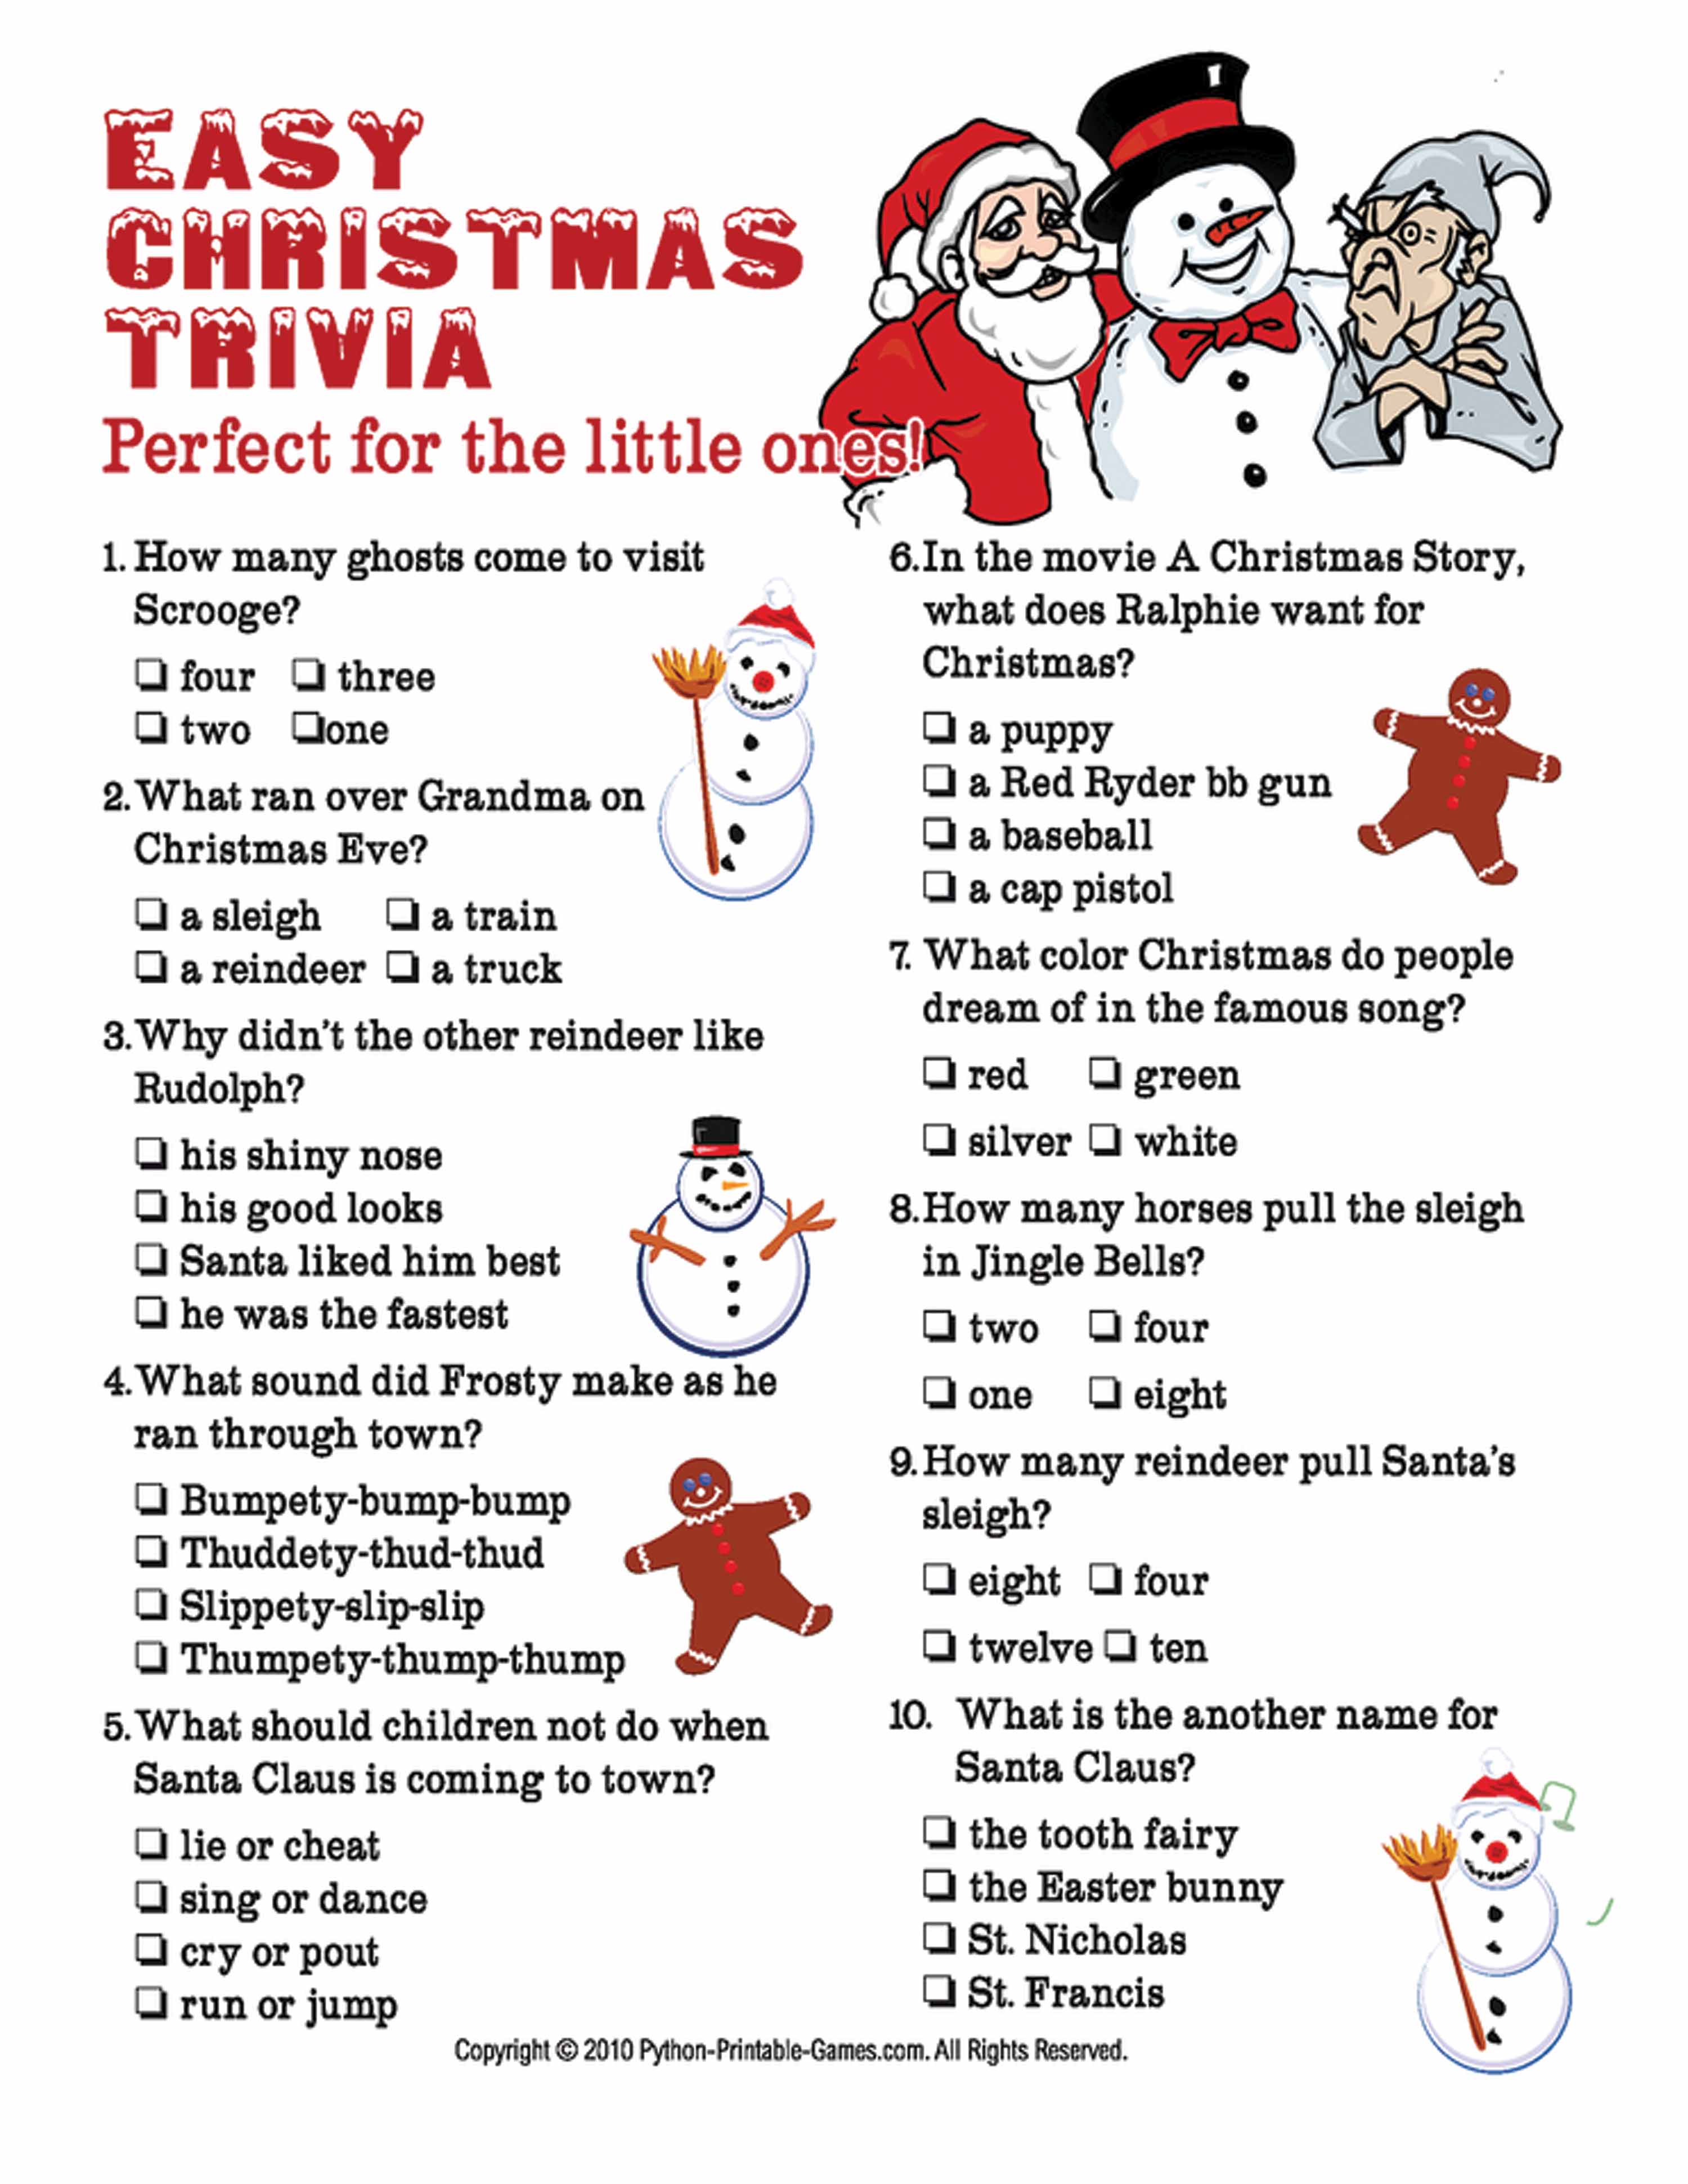 Download Trivia Games About Christmas rutrackerkings